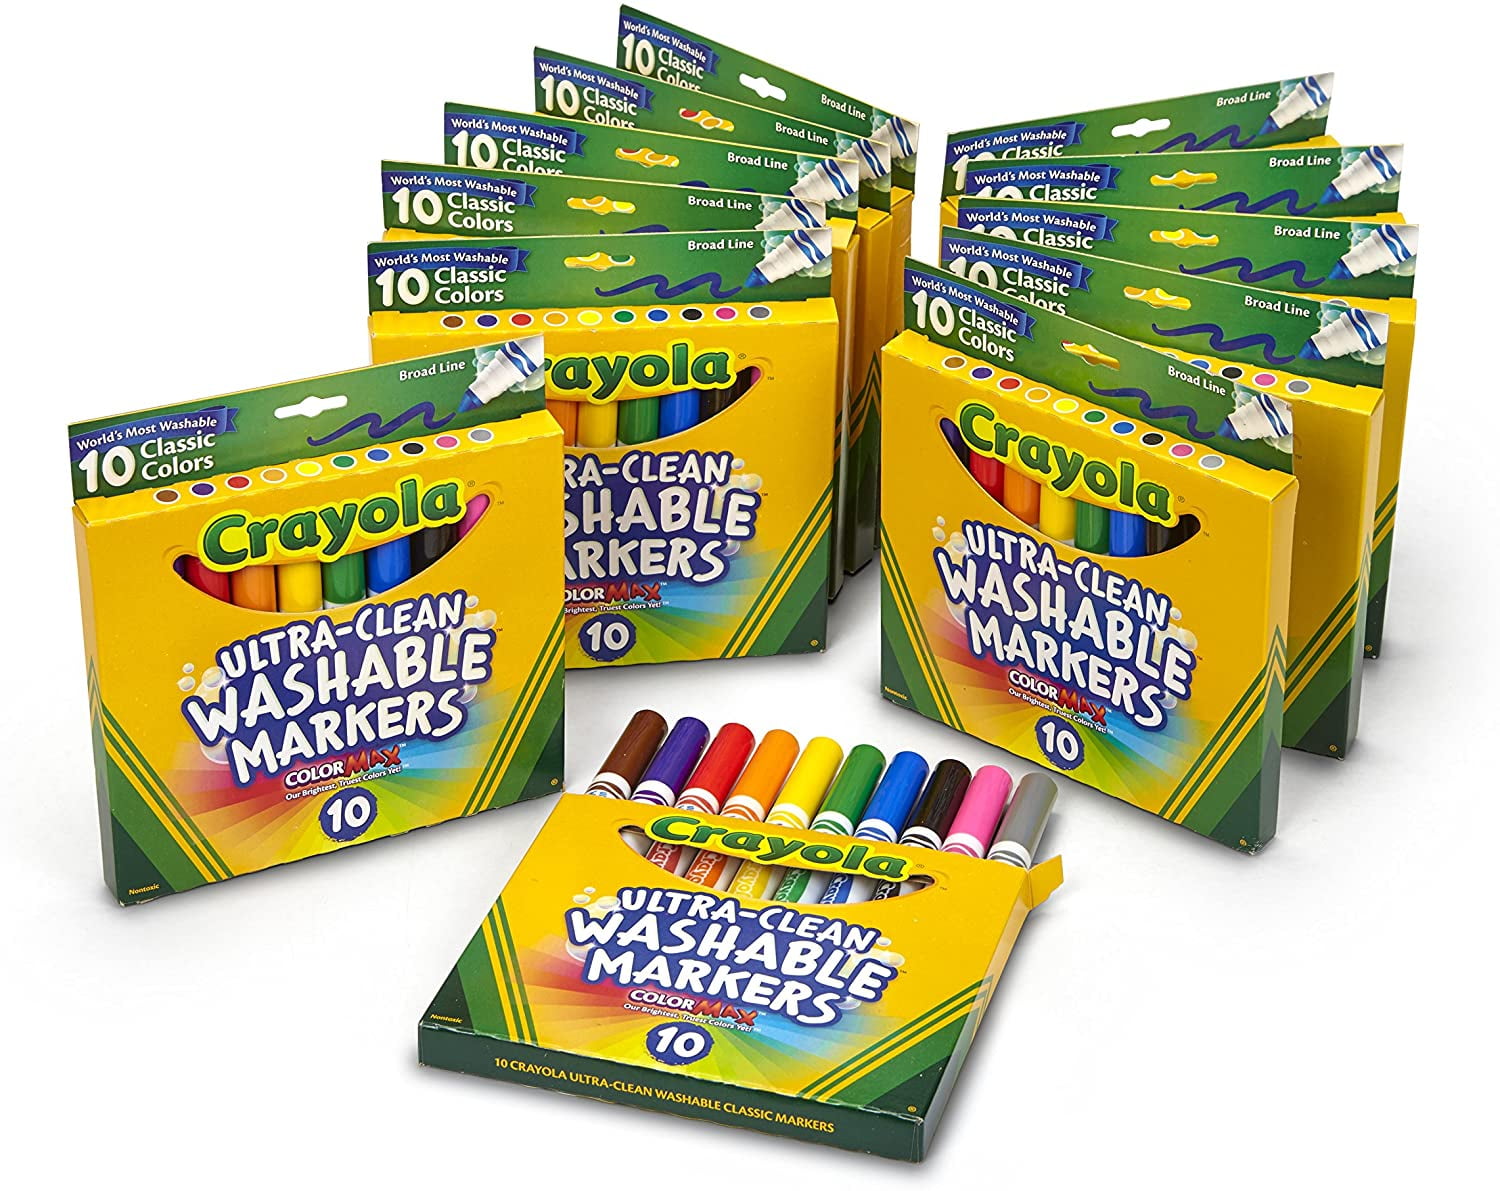 Crayola Broad Line Markers Bulk 12 Marker Packs with 10 Colors 